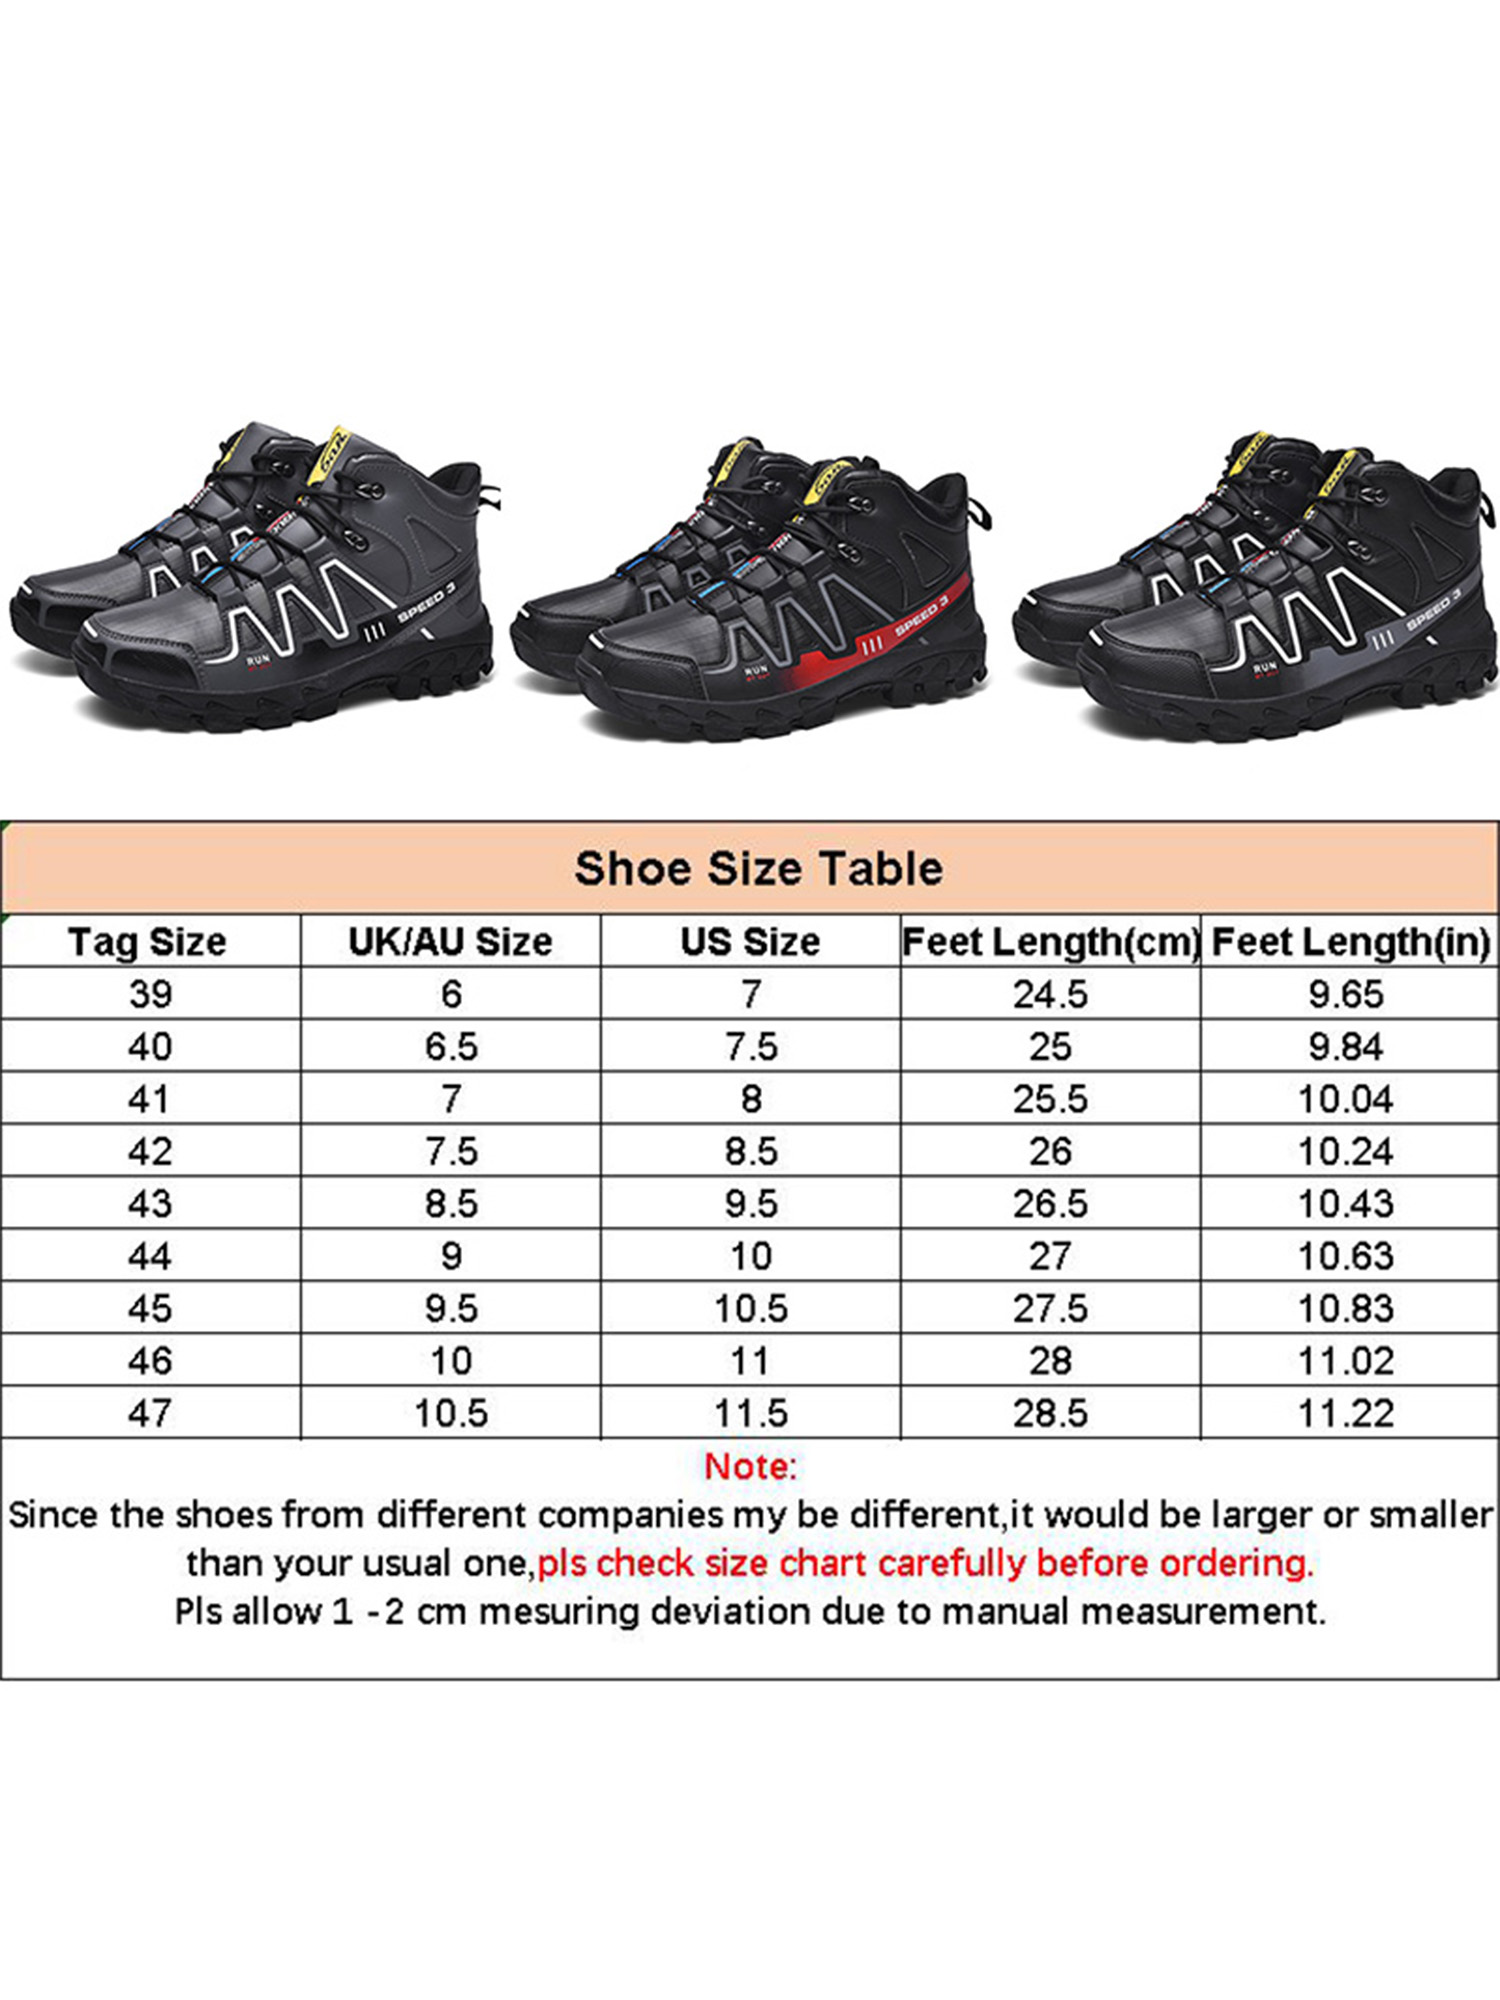 Avamo Mens Leather Steel Toe Cap Safety Work Boots Trainers Lace Up Shoes-Slip Resistant Industrial Construction Shoes - image 2 of 5